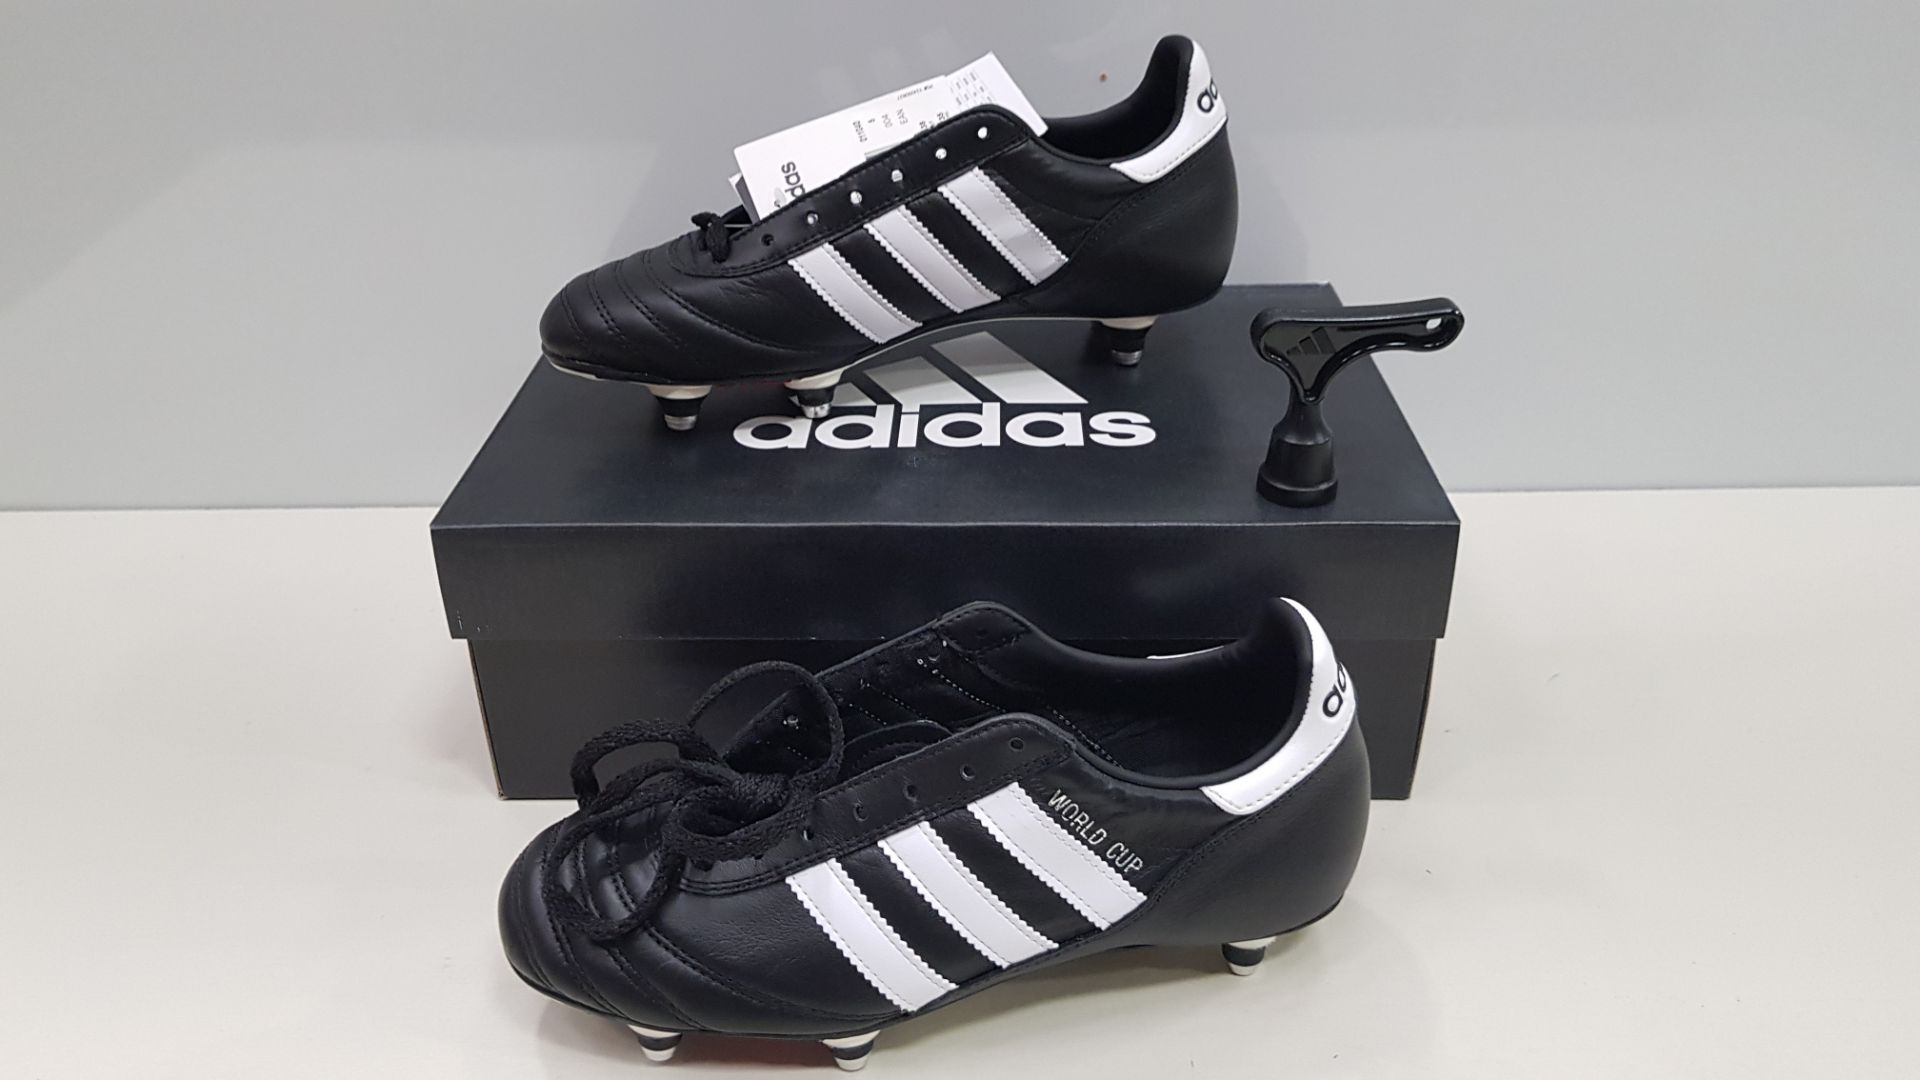 4 X BRAND NEW ADIDAS BLACK AND WHITE OLD SCHOOL WORLD CUP FOOTBALL BOOTS IN UK SIZE 5